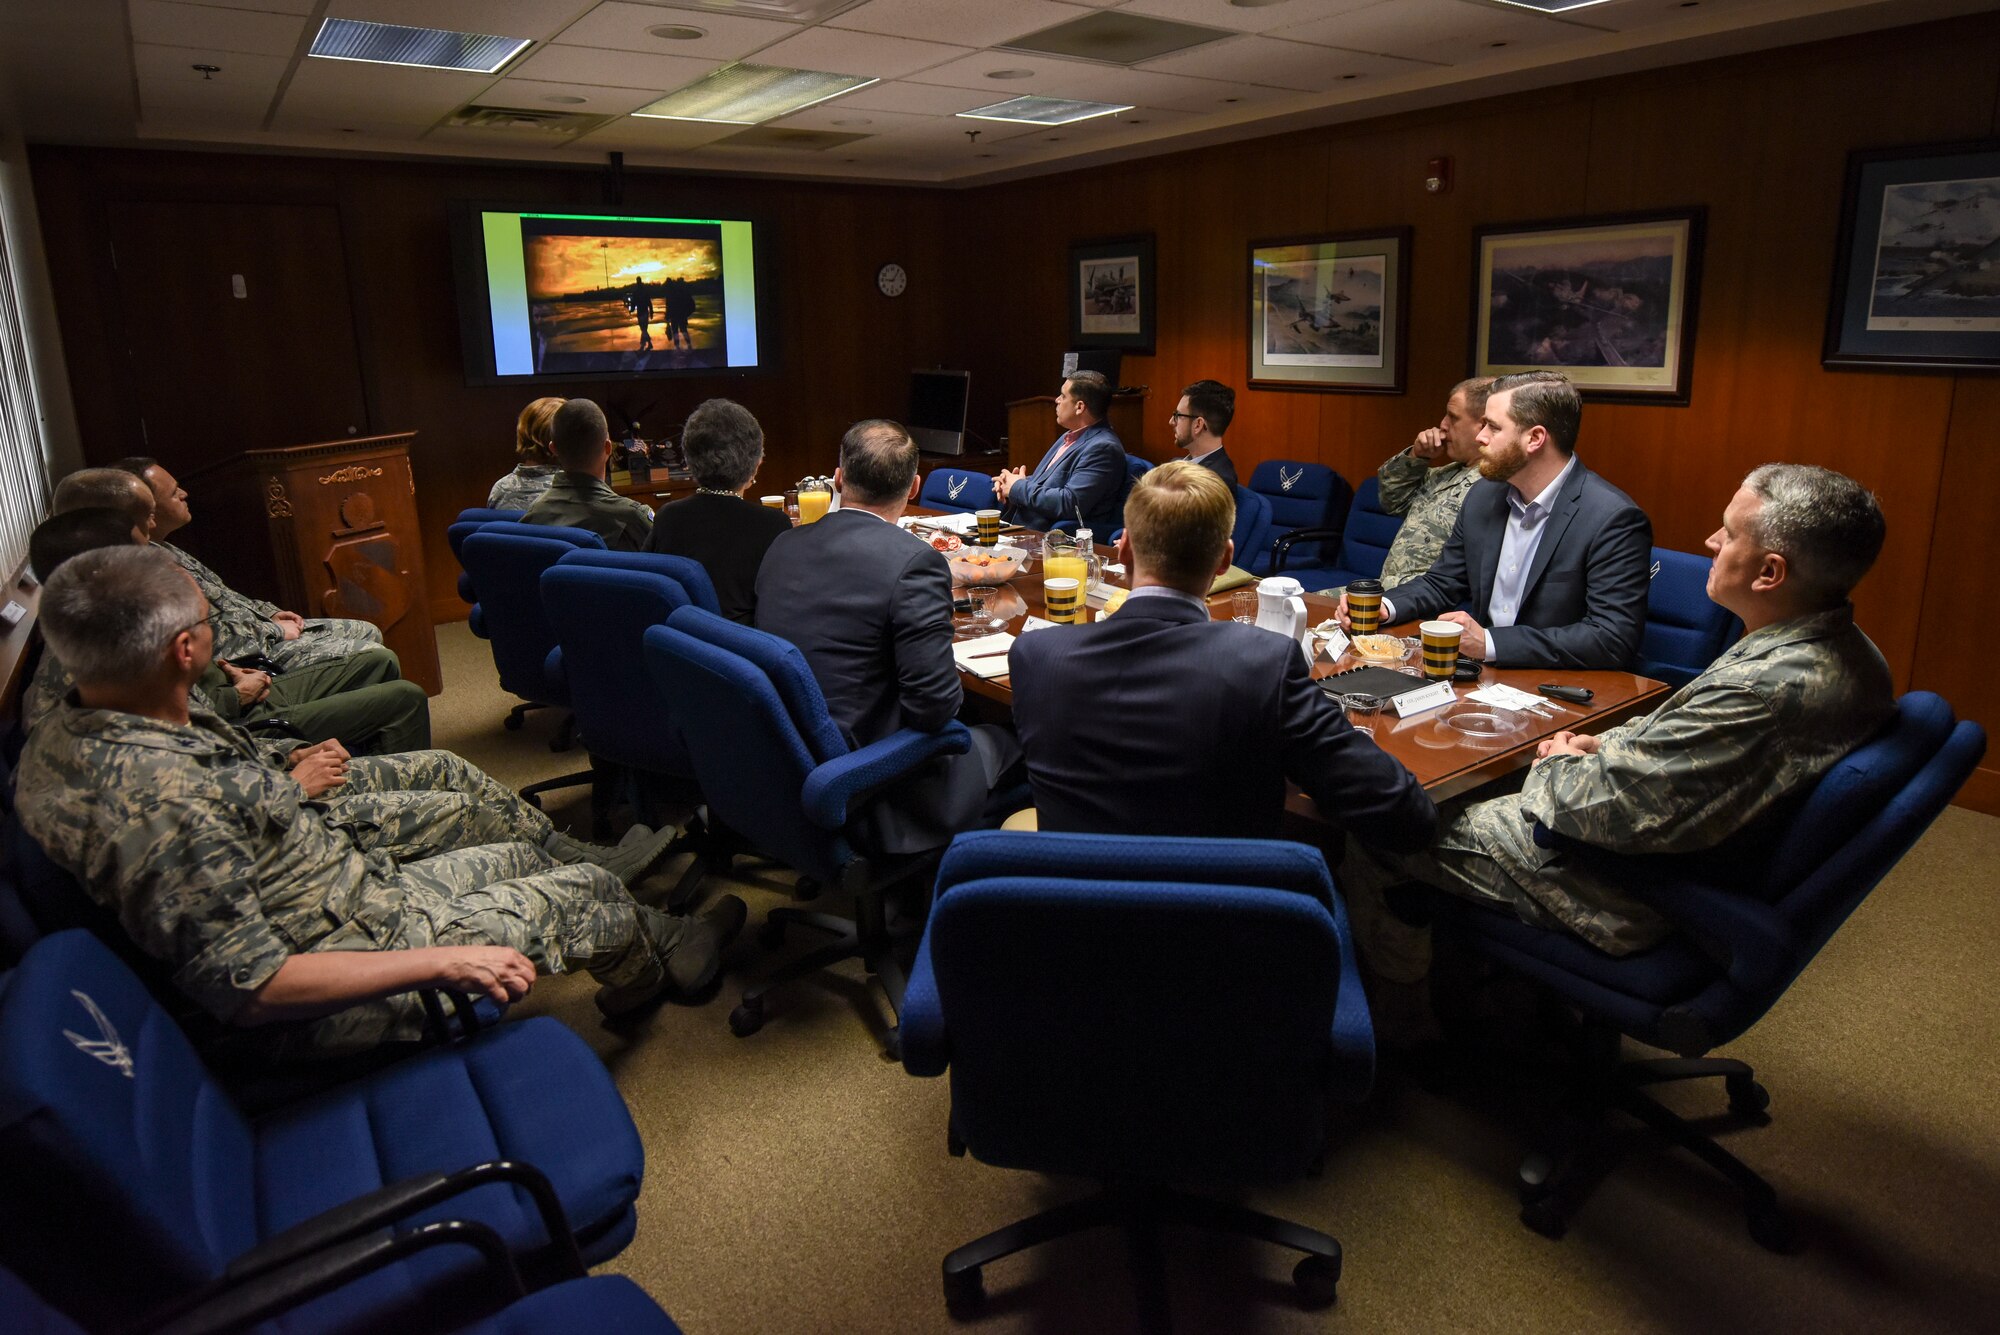 Members of 4th Fighter Wing leadership and staff delegates from the offices of North Carolina Sens. Richard Burr and Thom Tillis watch the wing mission video, Feb. 21, 2018, at Seymour Johnson Air Force Base, North Carolina. The congressmen's representatives toured several facilities on base to get a better understanding of the impact Seymour Johnson AFB has on both the local community and the Air Force as a whole. (U.S. Air Force photo by Staff Sgt. Brittain Crolley)